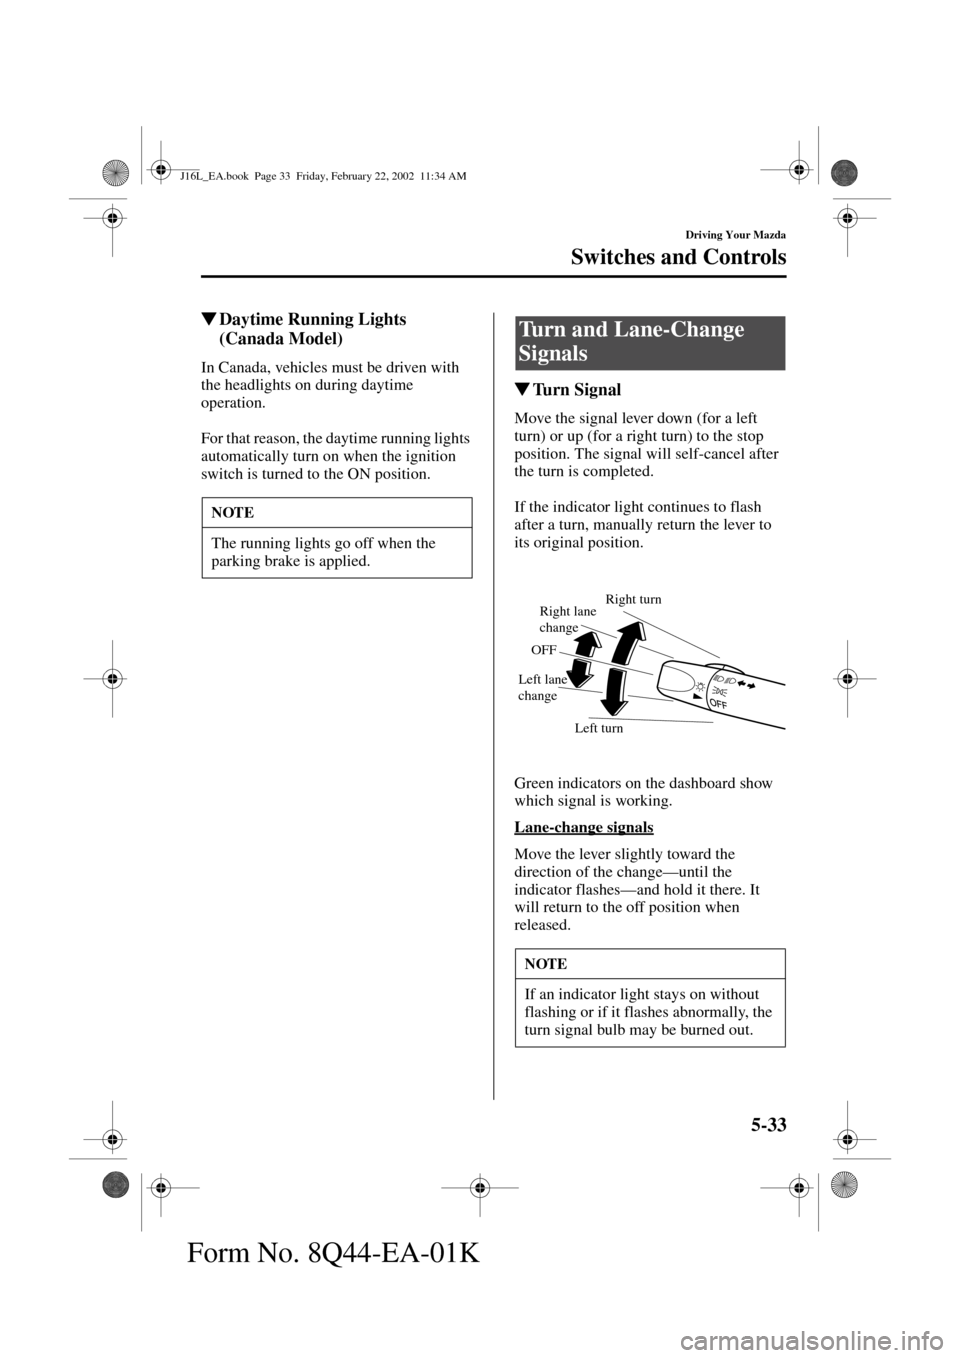 MAZDA MODEL MPV 2002  Owners Manual (in English) 5-33
Driving Your Mazda
Switches and Controls
Form No. 8Q44-EA-01K
Daytime Running Lights 
(Canada Model)
In Canada, vehicles must be driven with 
the headlights on during daytime 
operation.
For tha